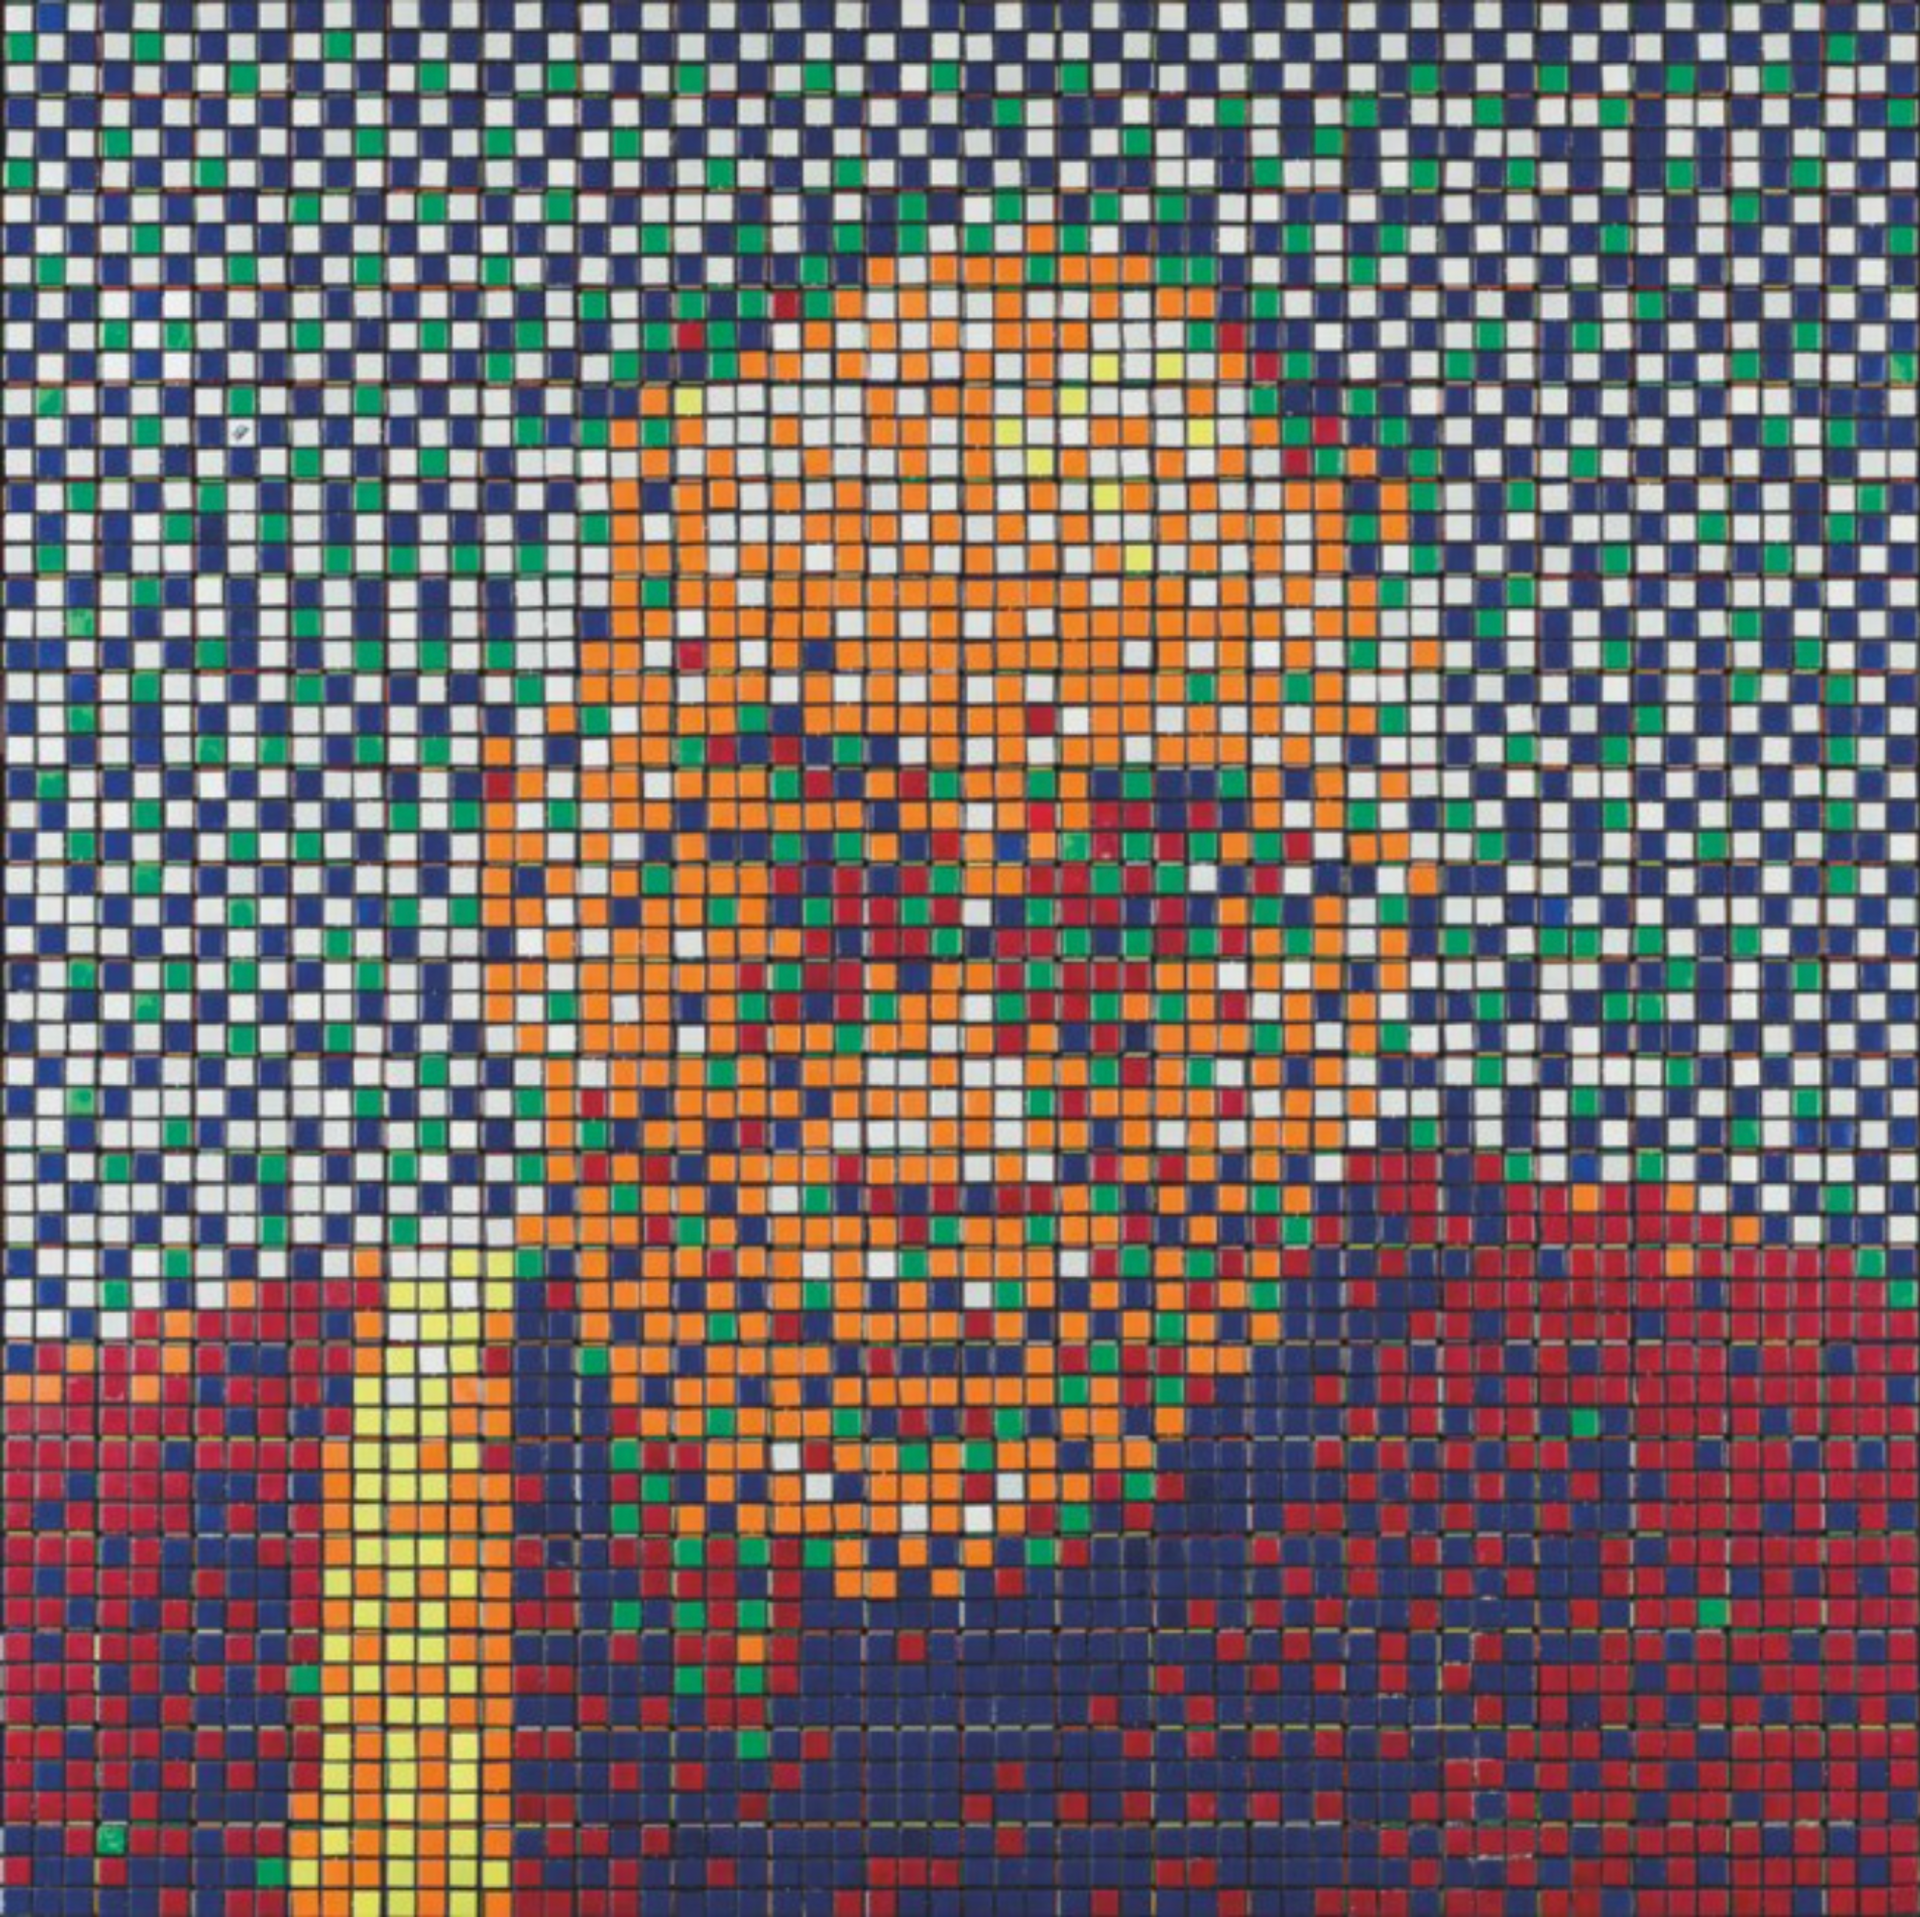 400 Chinese Cubes by Invader